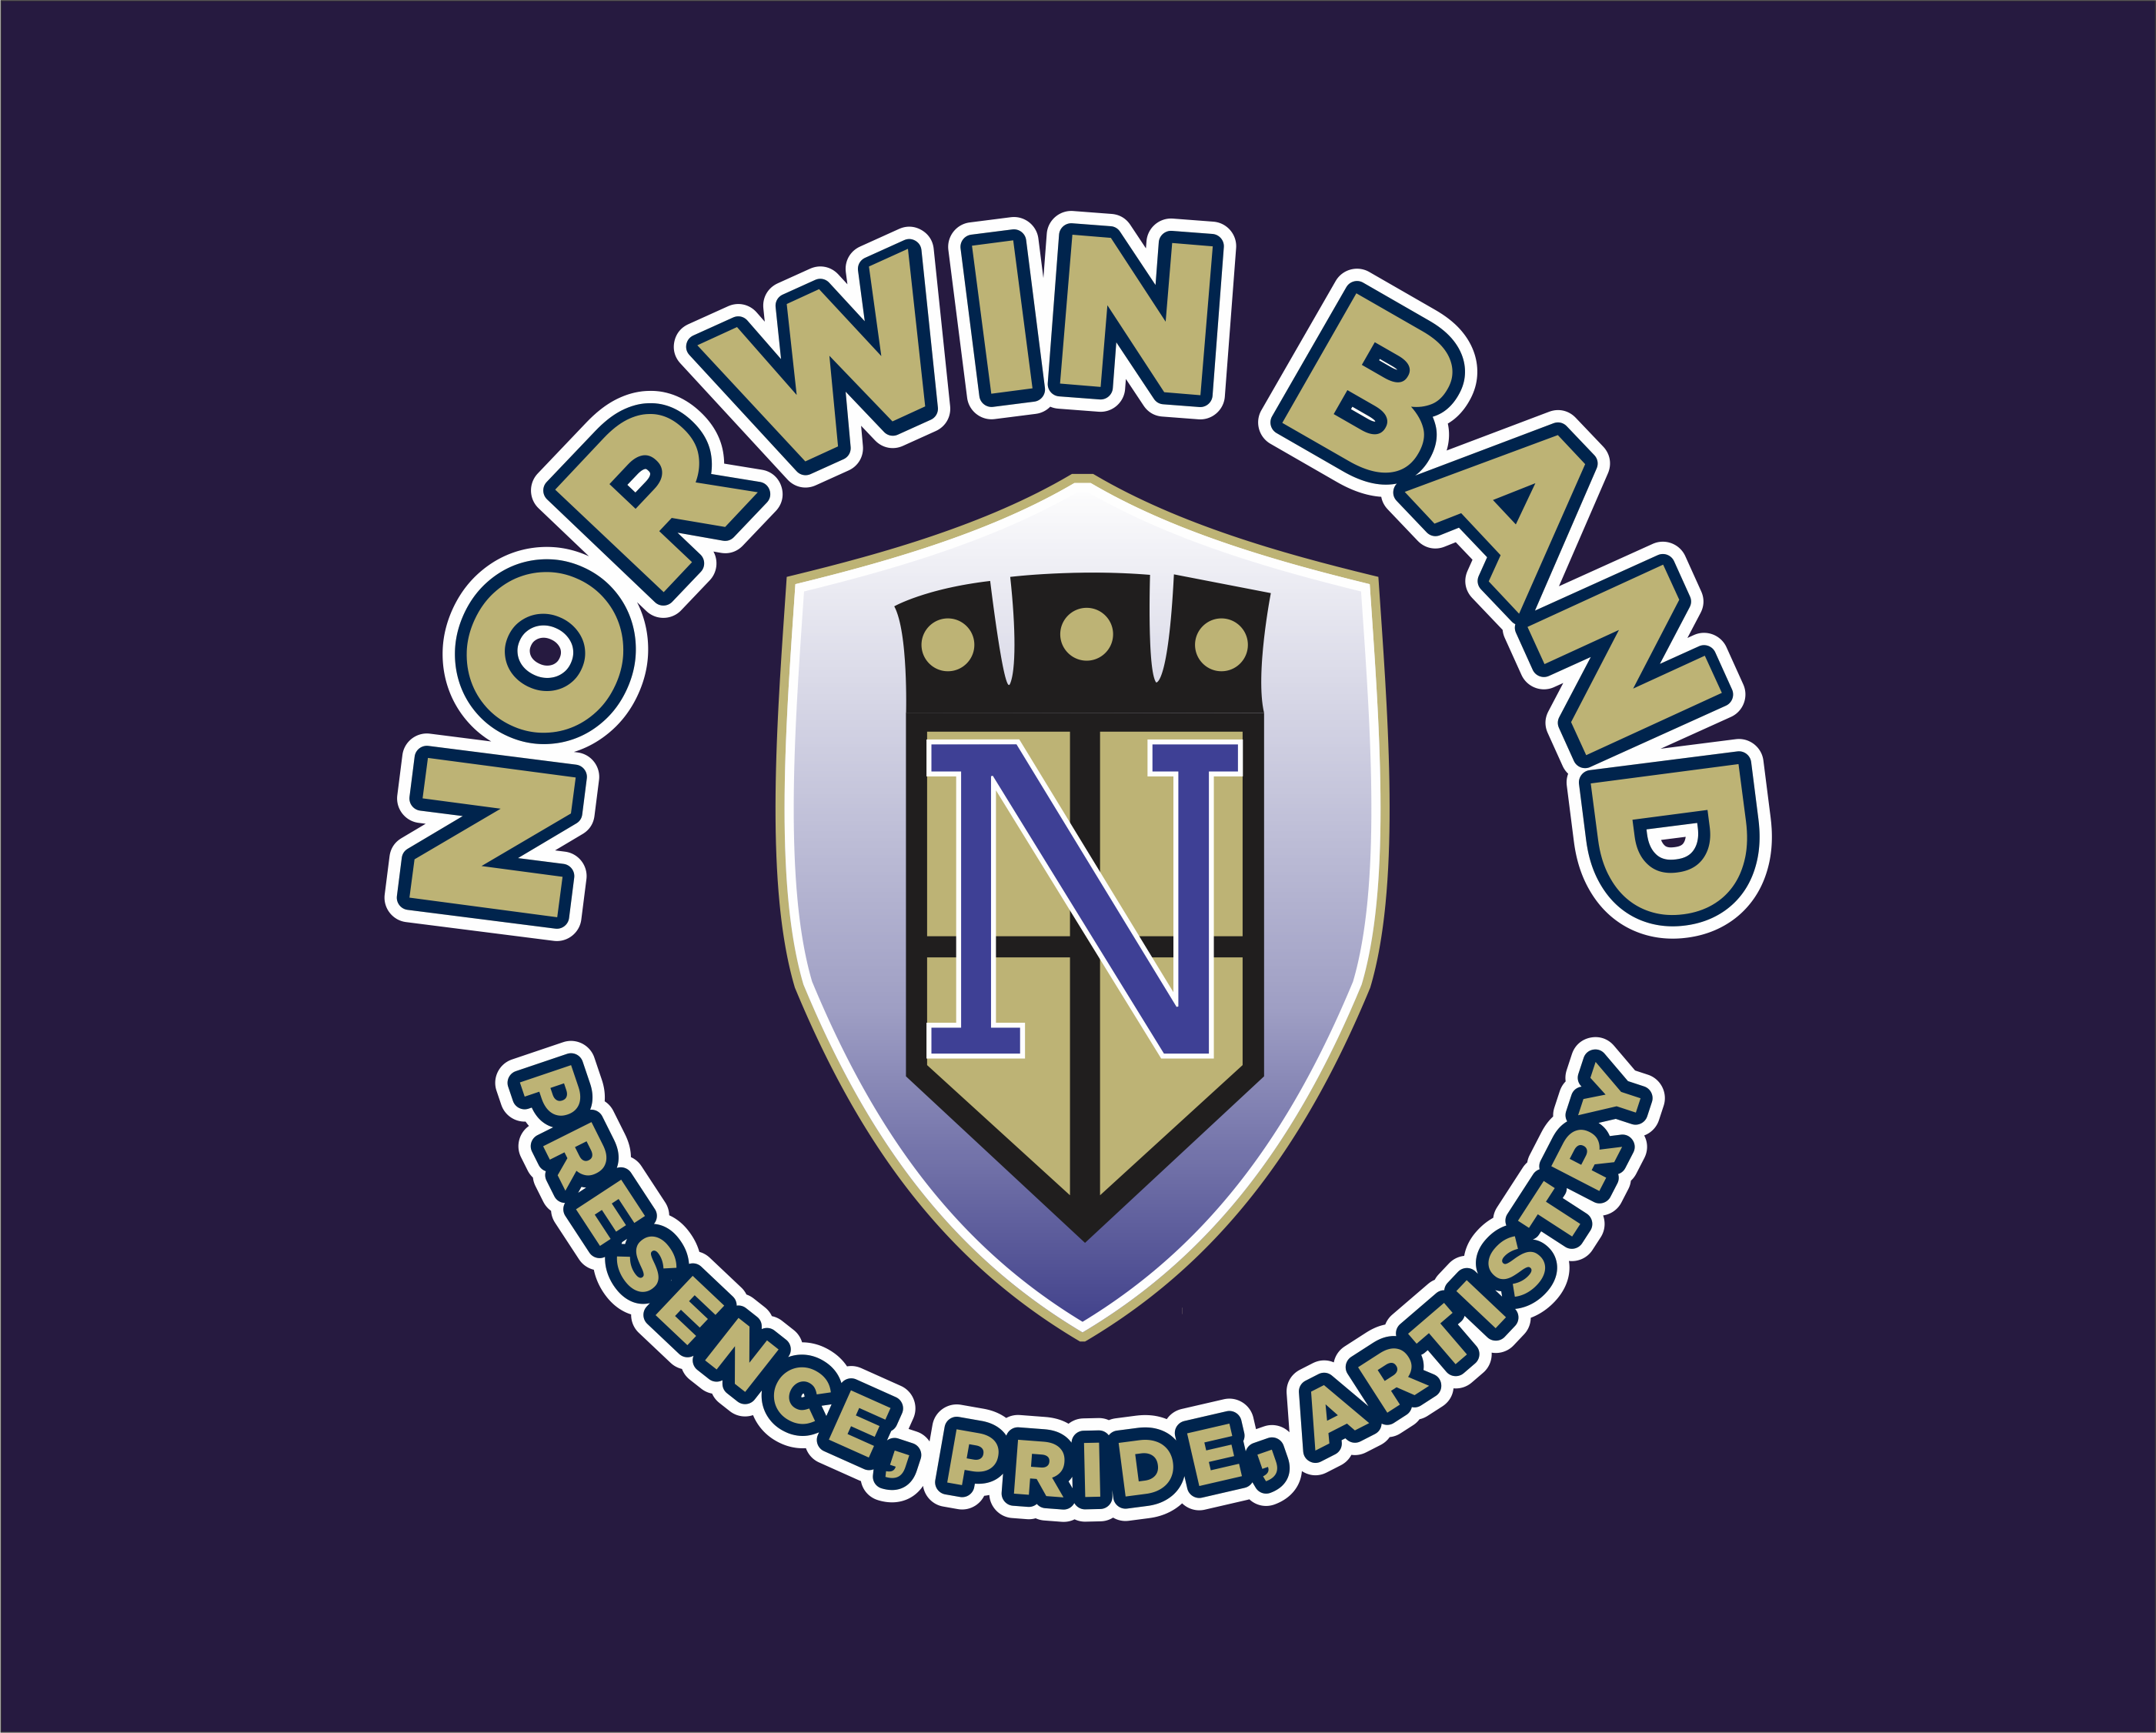 Norwin Band 2021 The Embroidery People